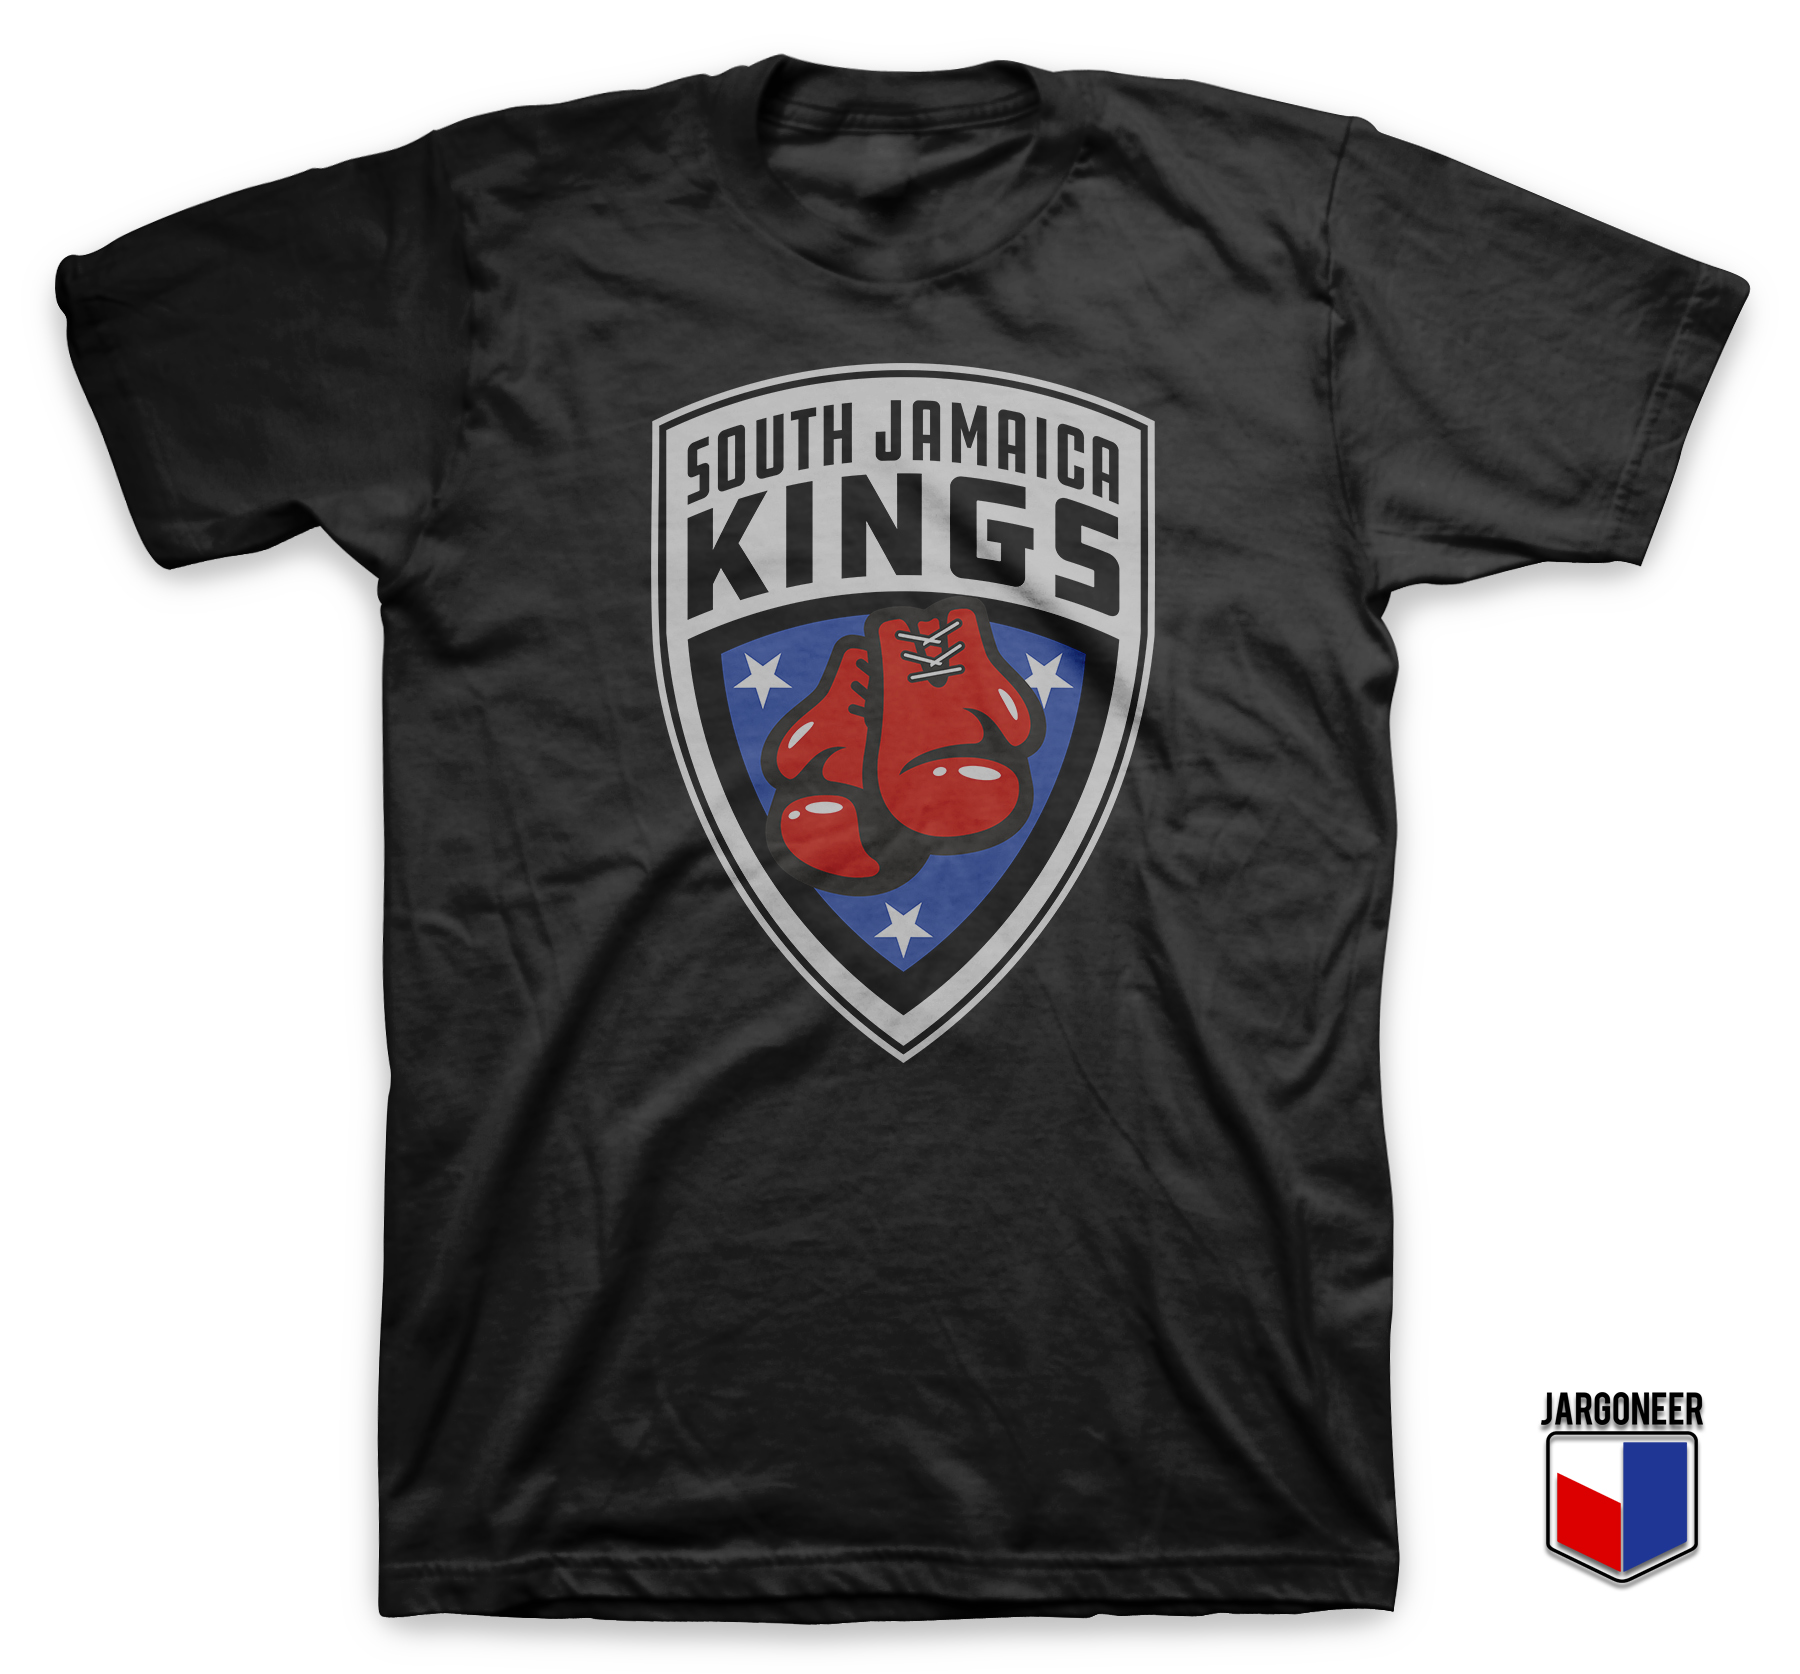 The Kings From South Jamaica Black T Shirt - Shop Unique Graphic Cool Shirt Designs